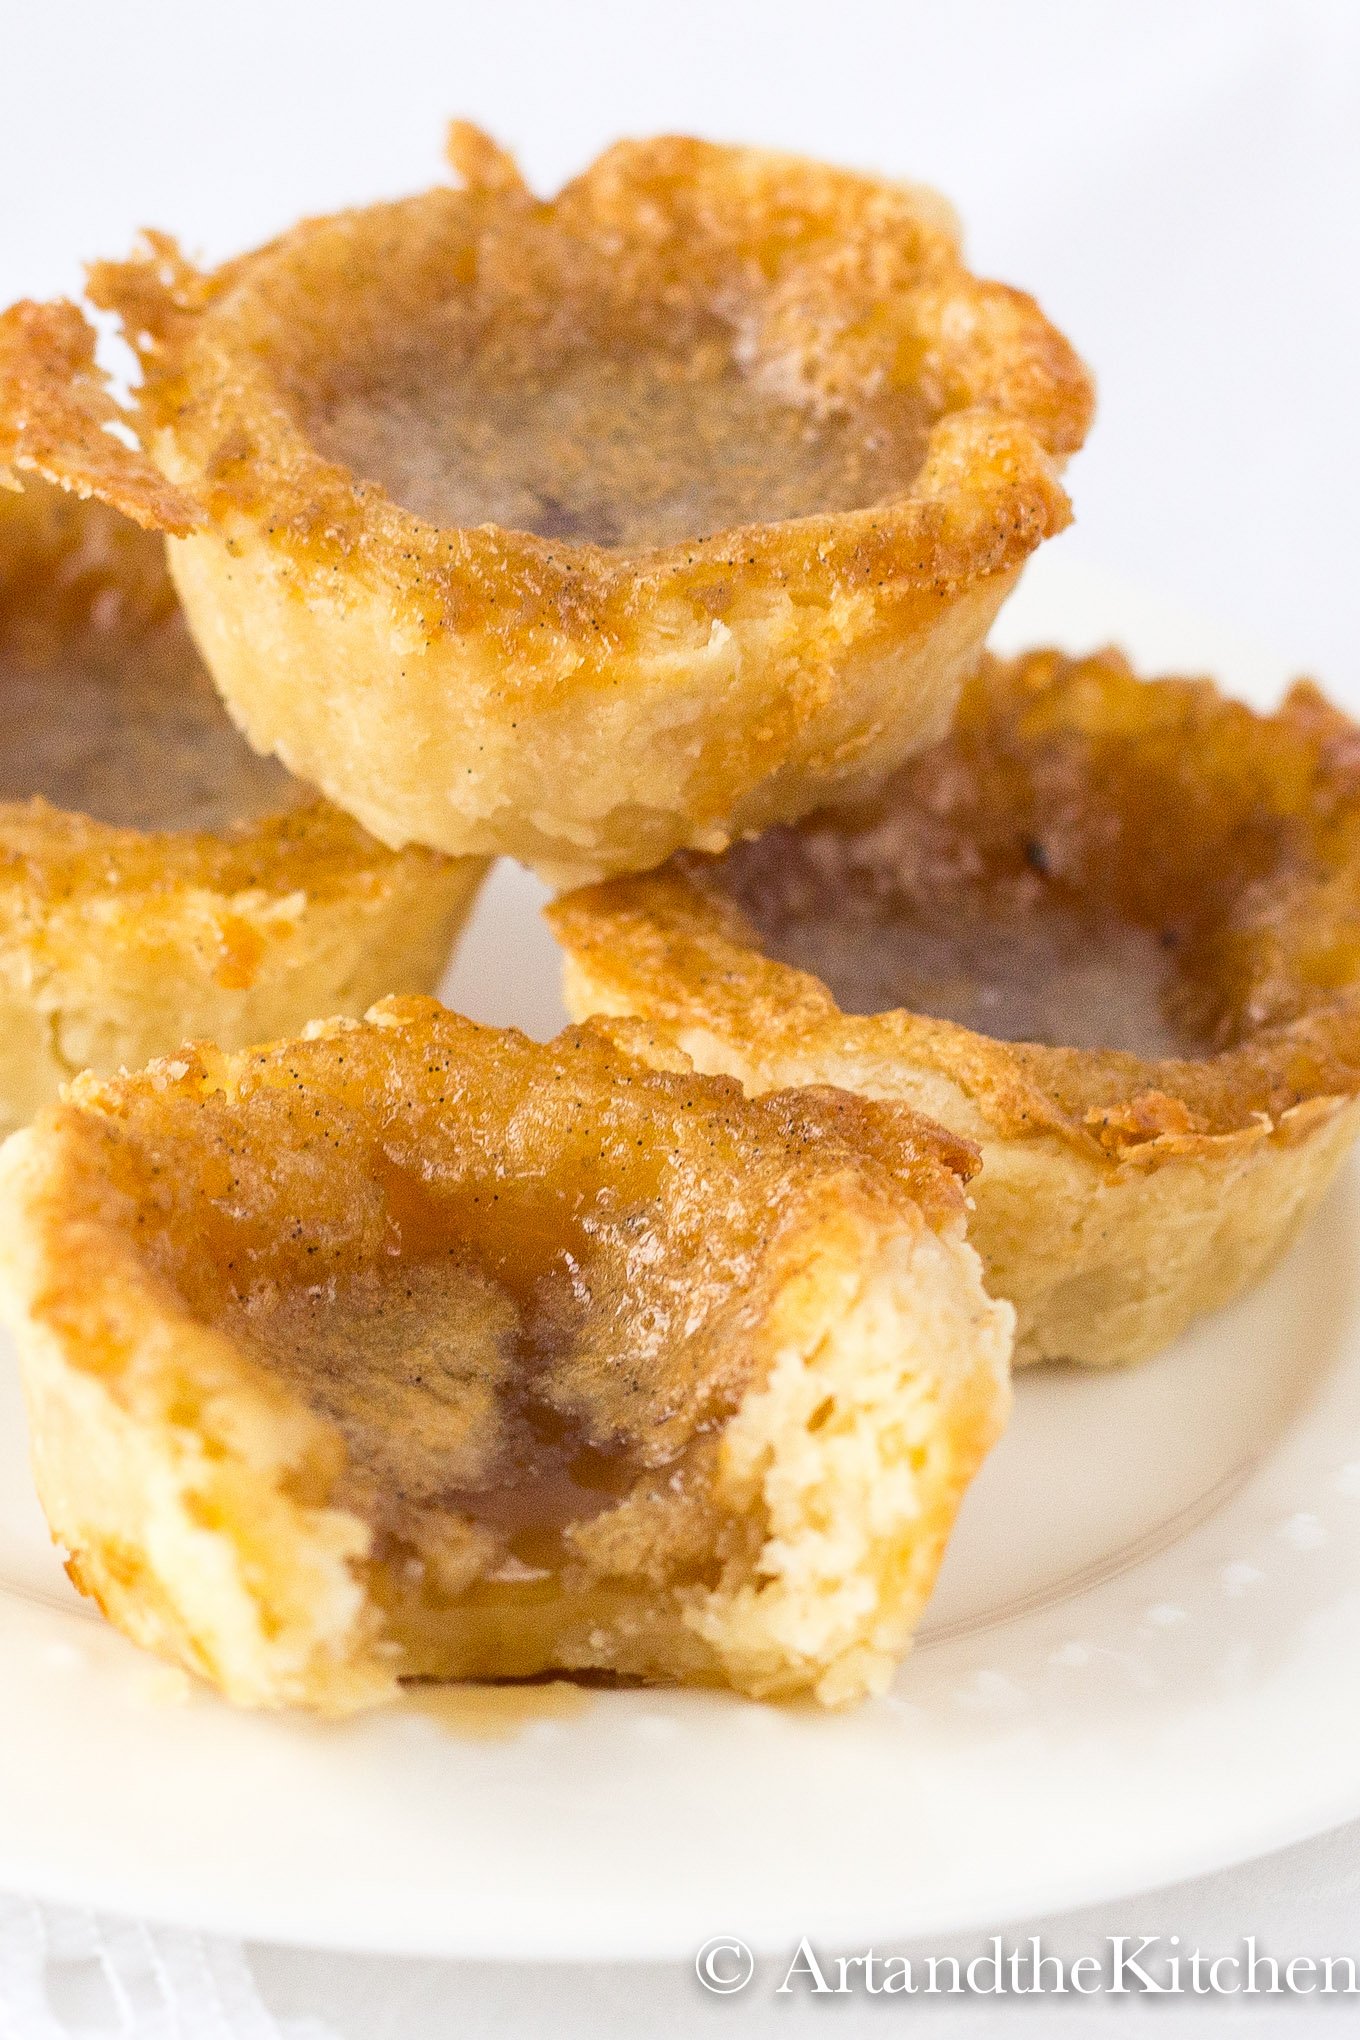 stack of 4 homemade butter tarts on white plate